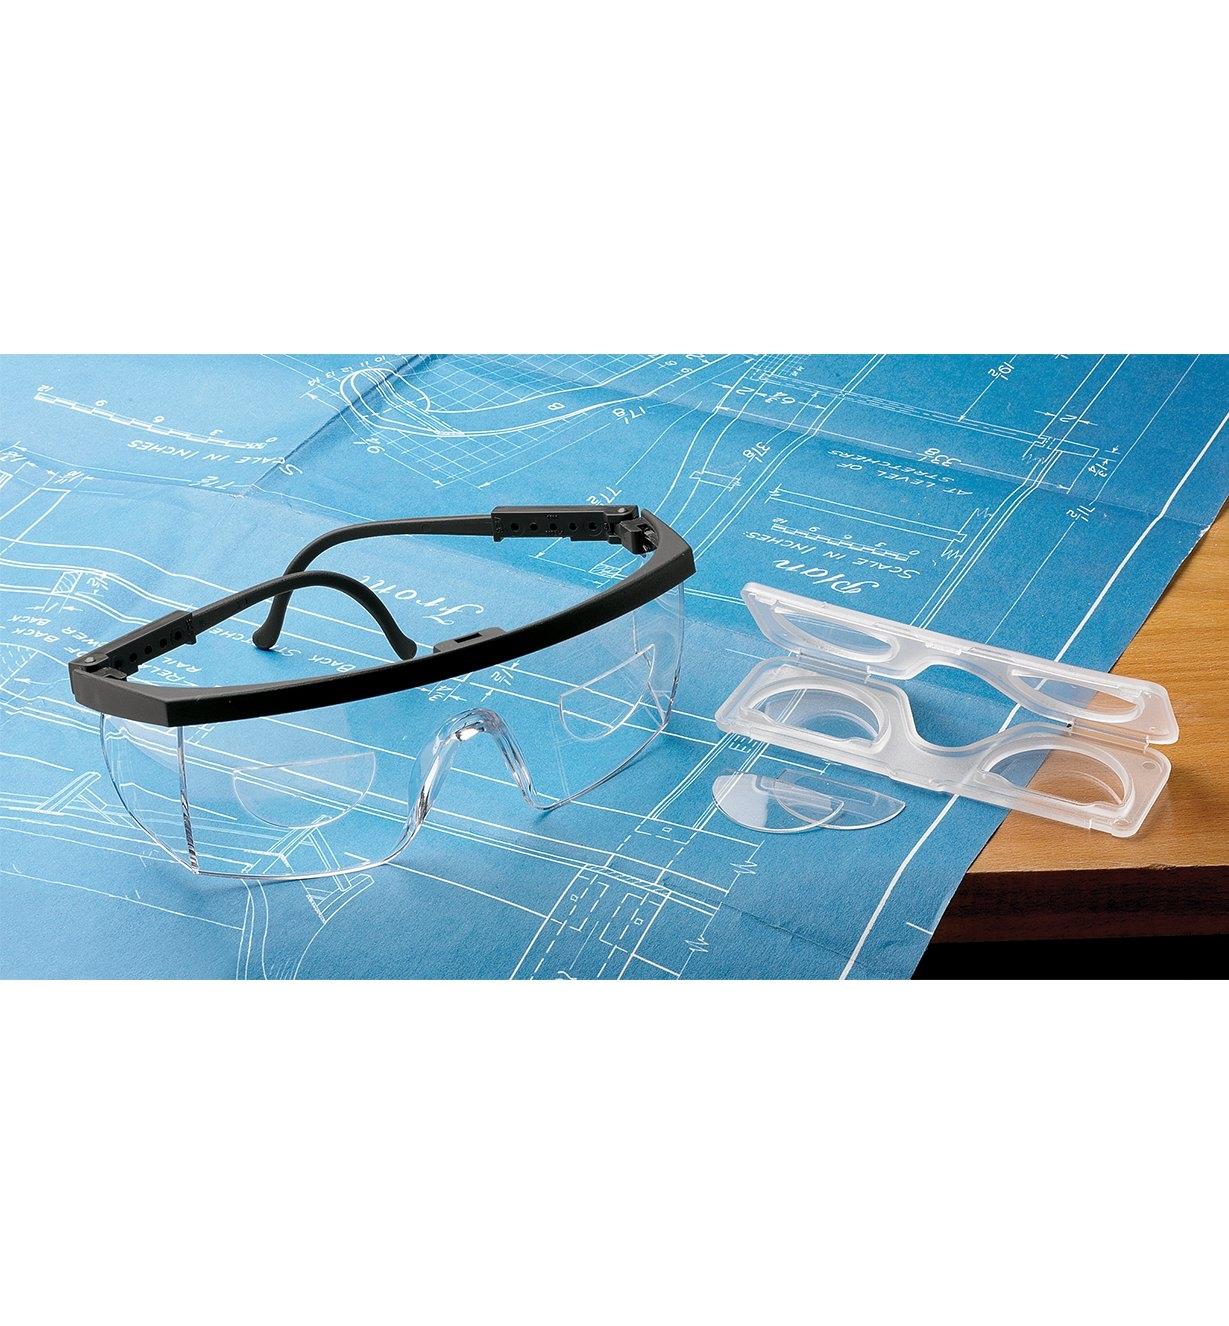 Magnifying lenses and case beside a pair of safety glasses with magnifying lenses applied